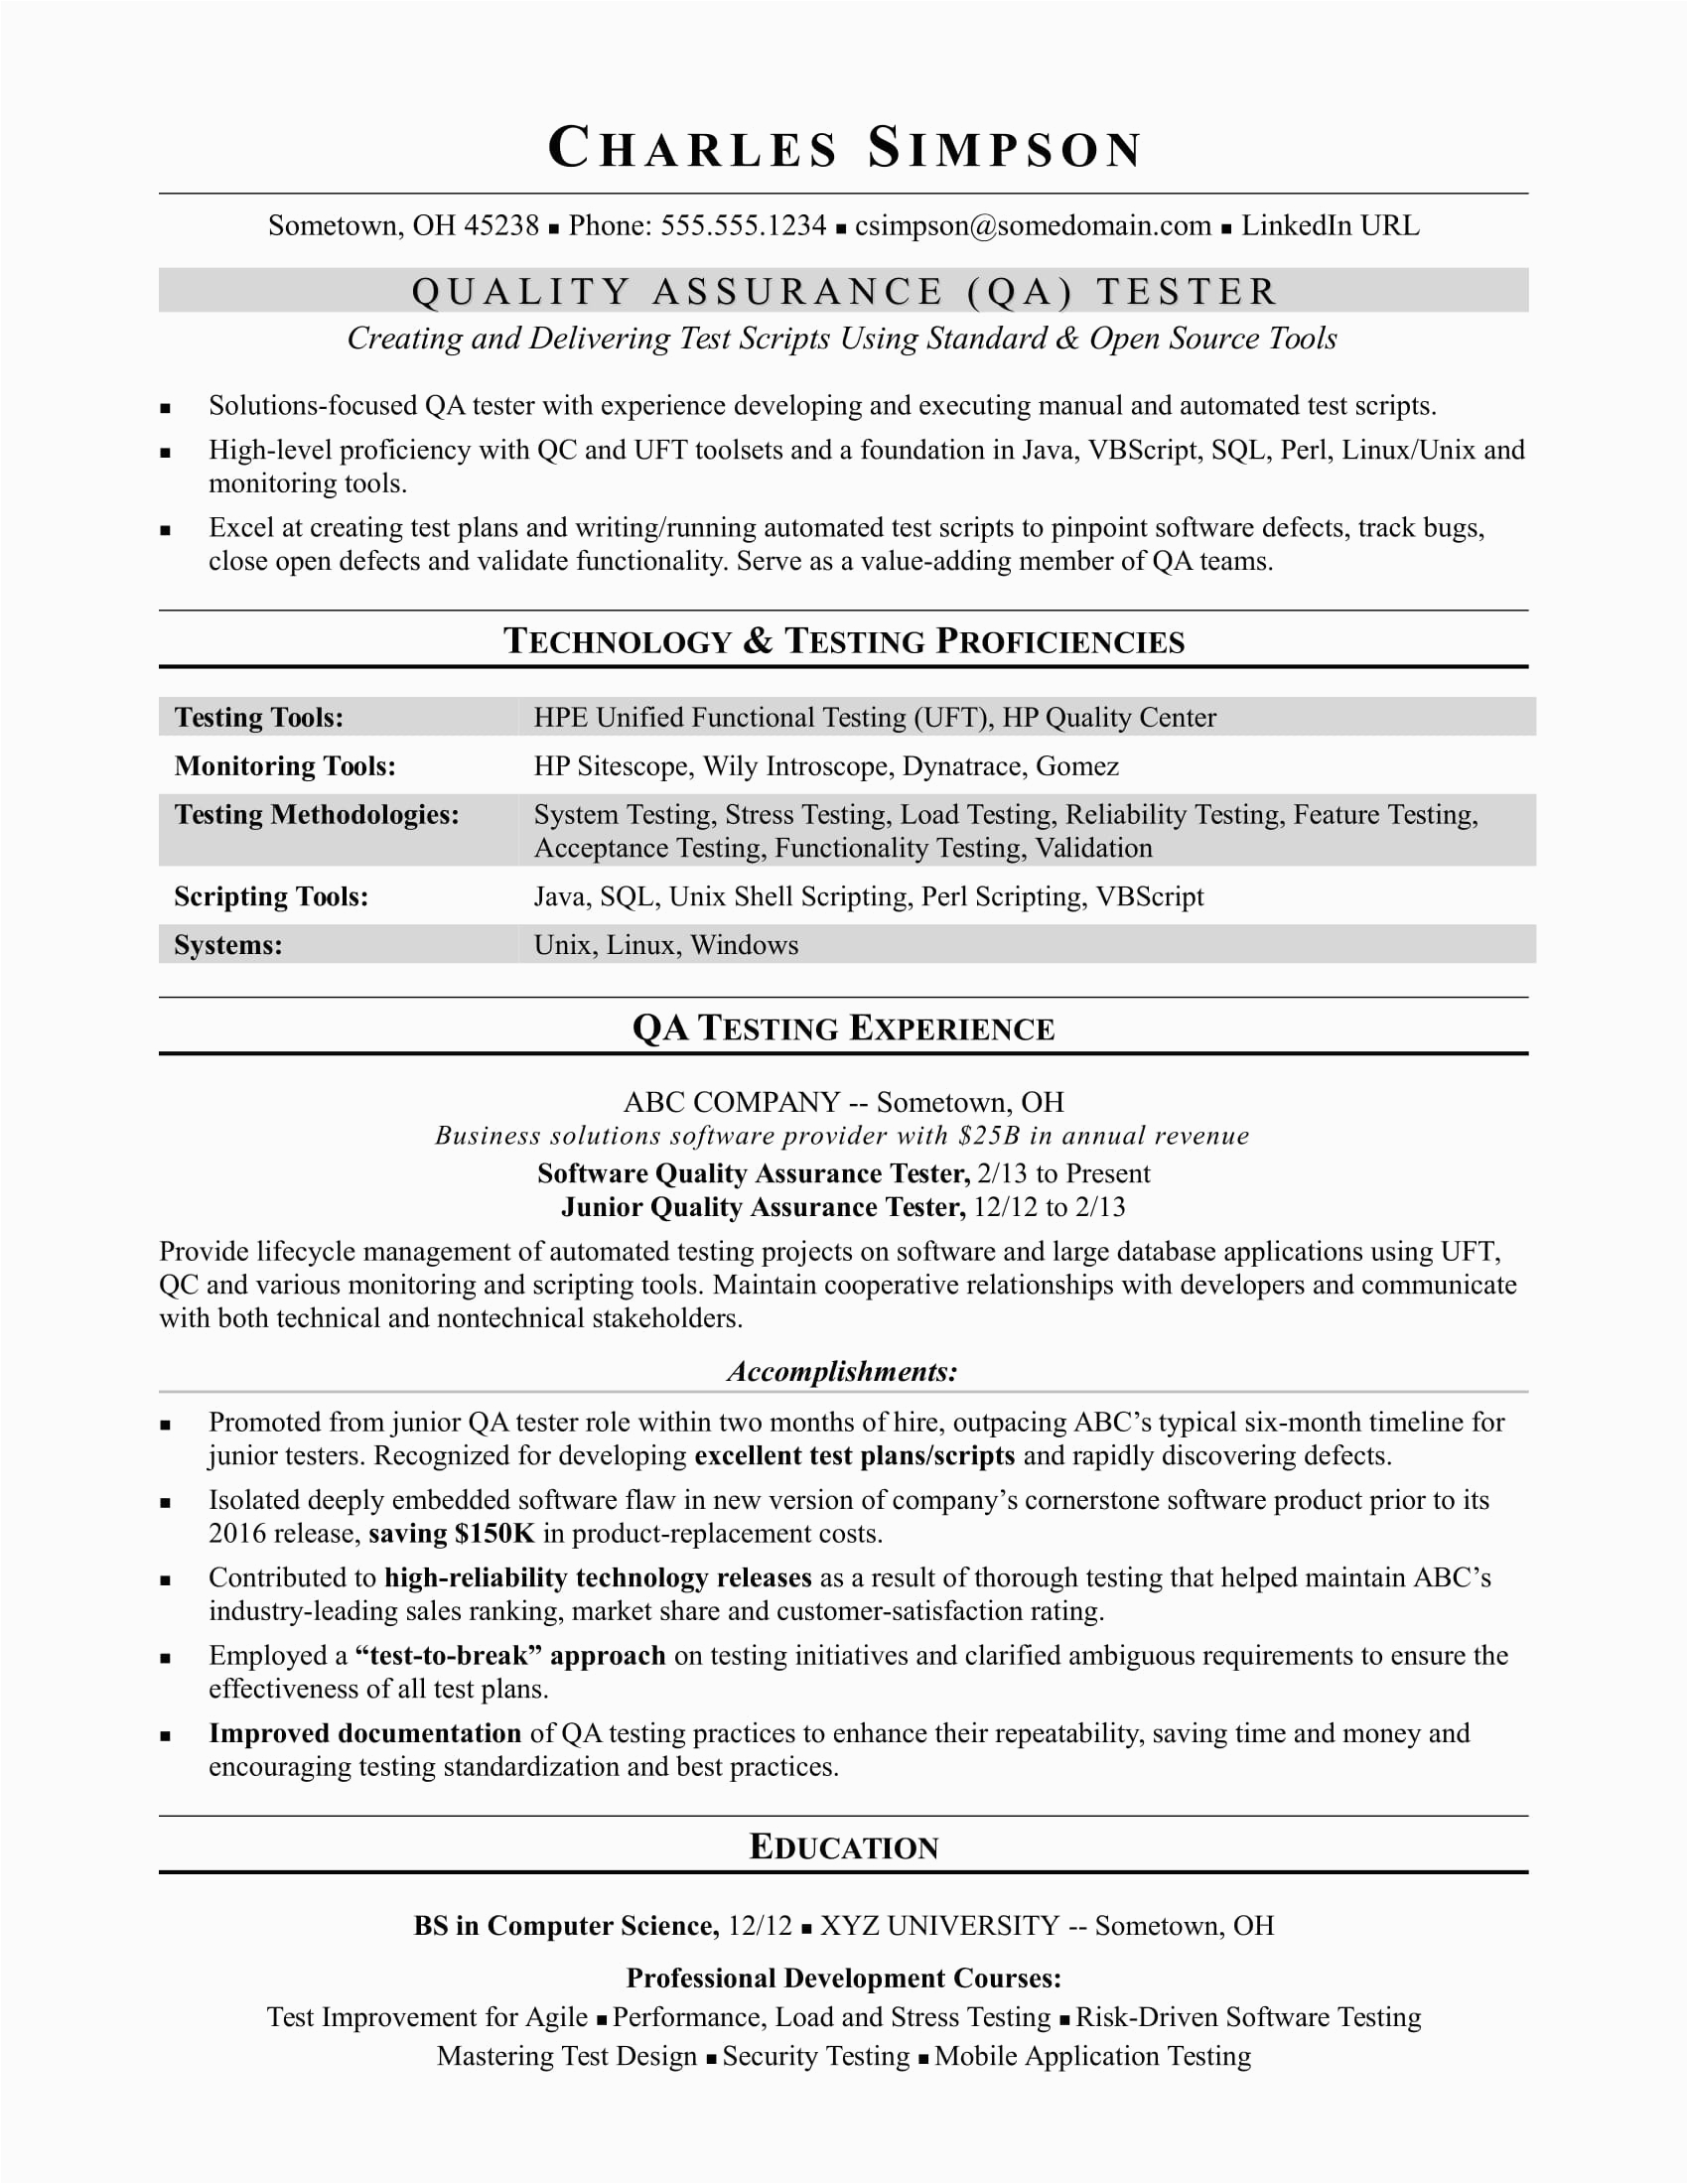 Experienced Qa software Tester Resume Sample top Rated Manual Testing Resume Sample for 5 Years